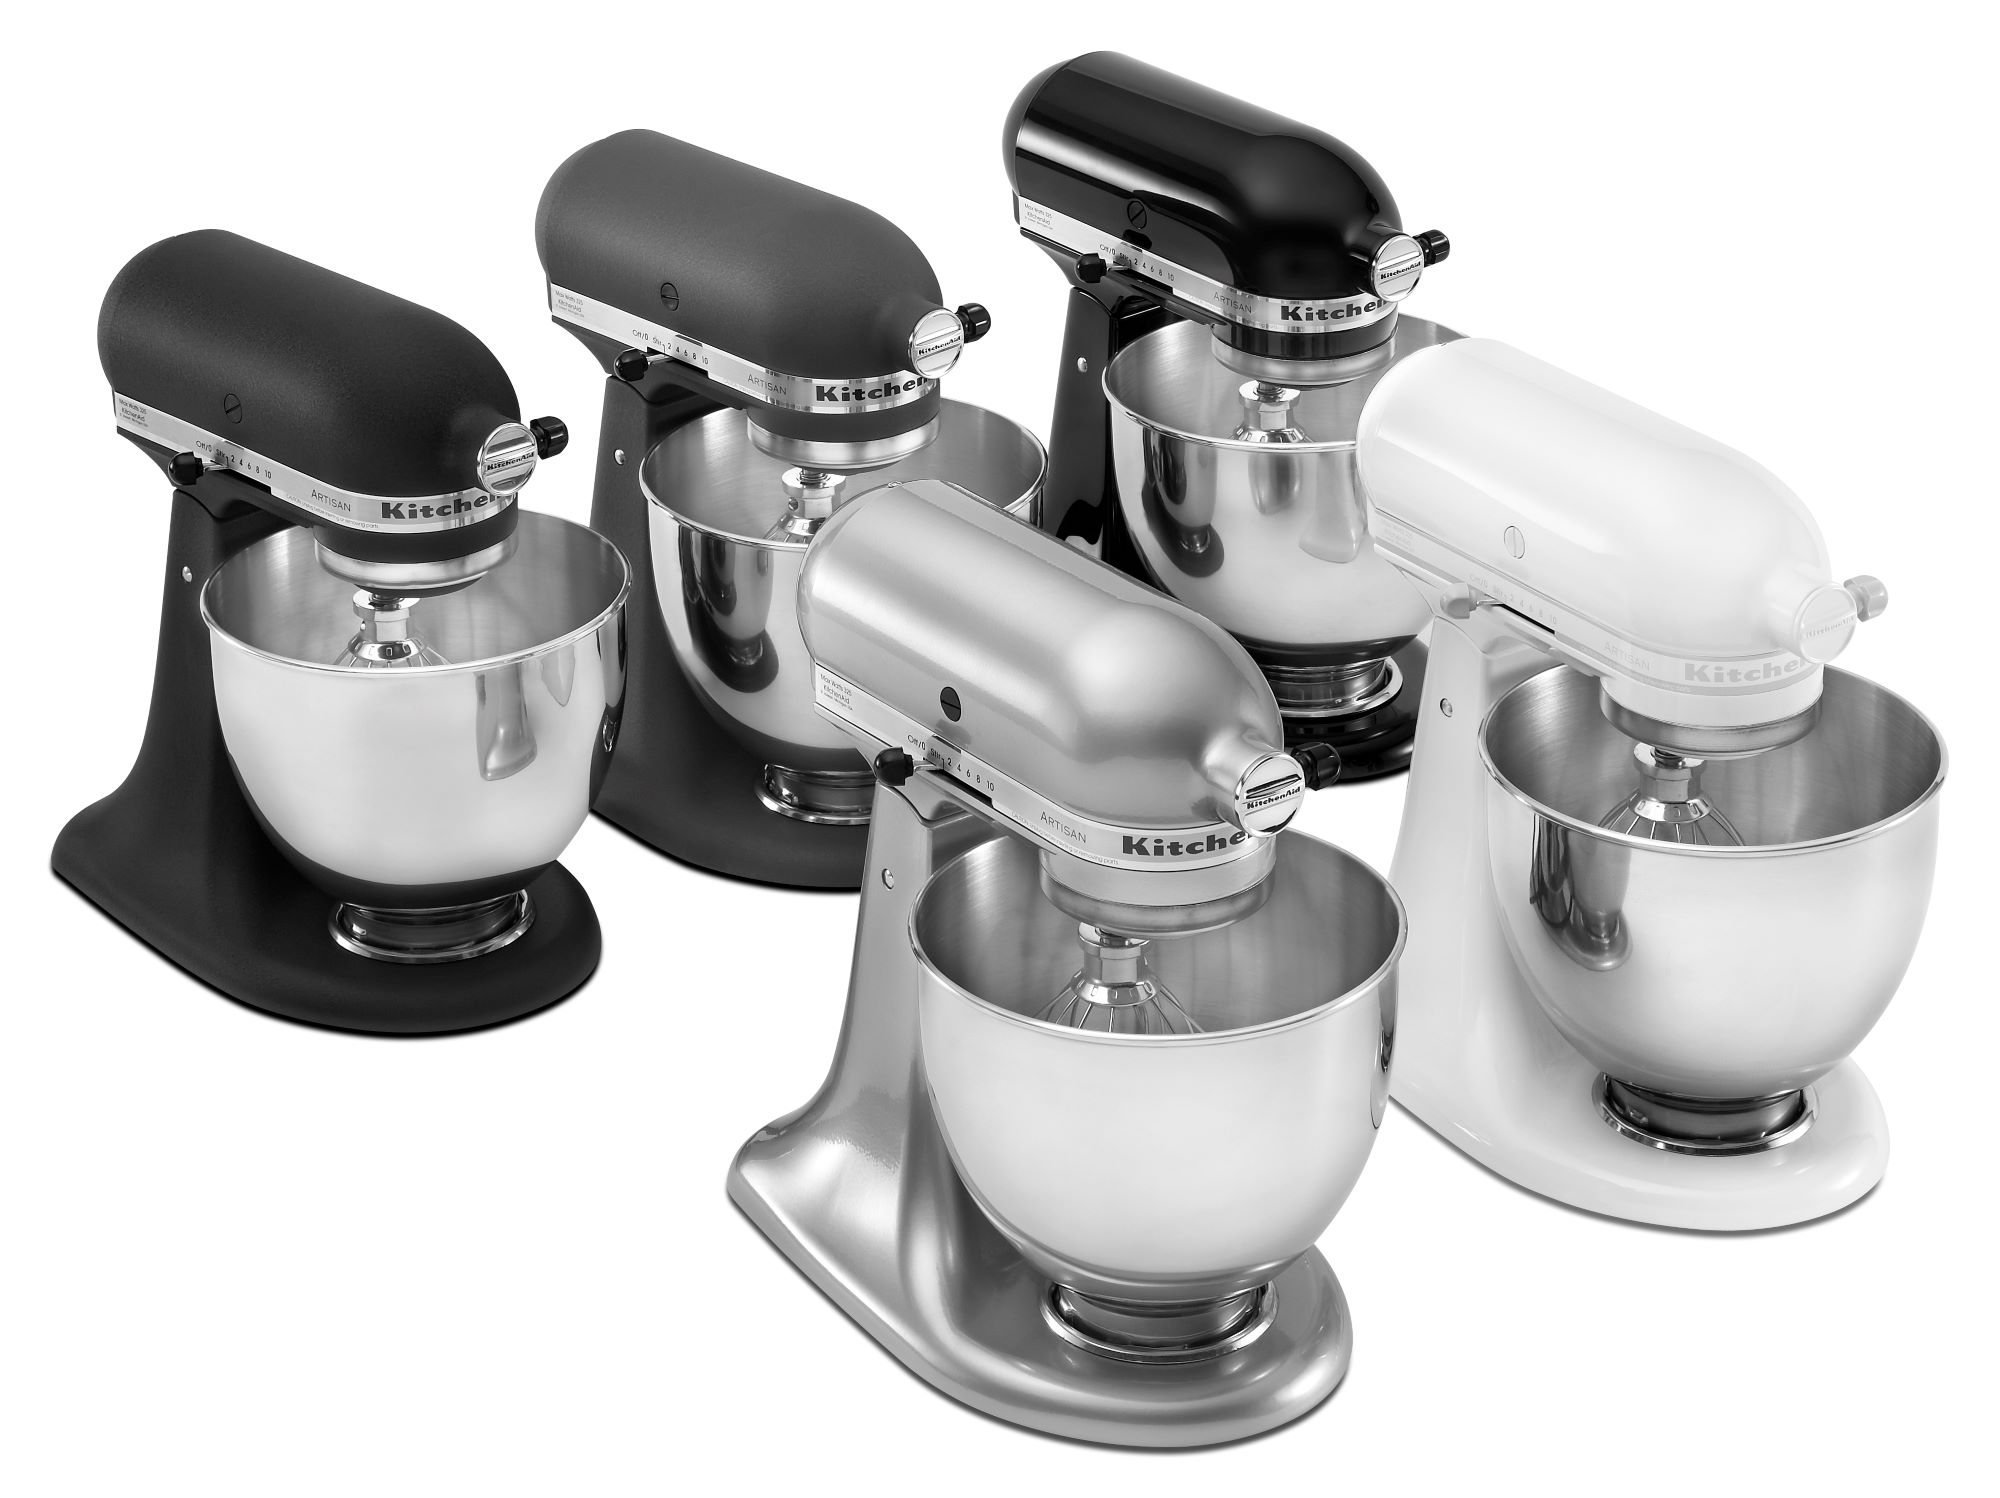 Black 5-Quart Series at the department 10-Speed KitchenAid Mixer Mixers Artisan Stand in Stand Imperial Residential